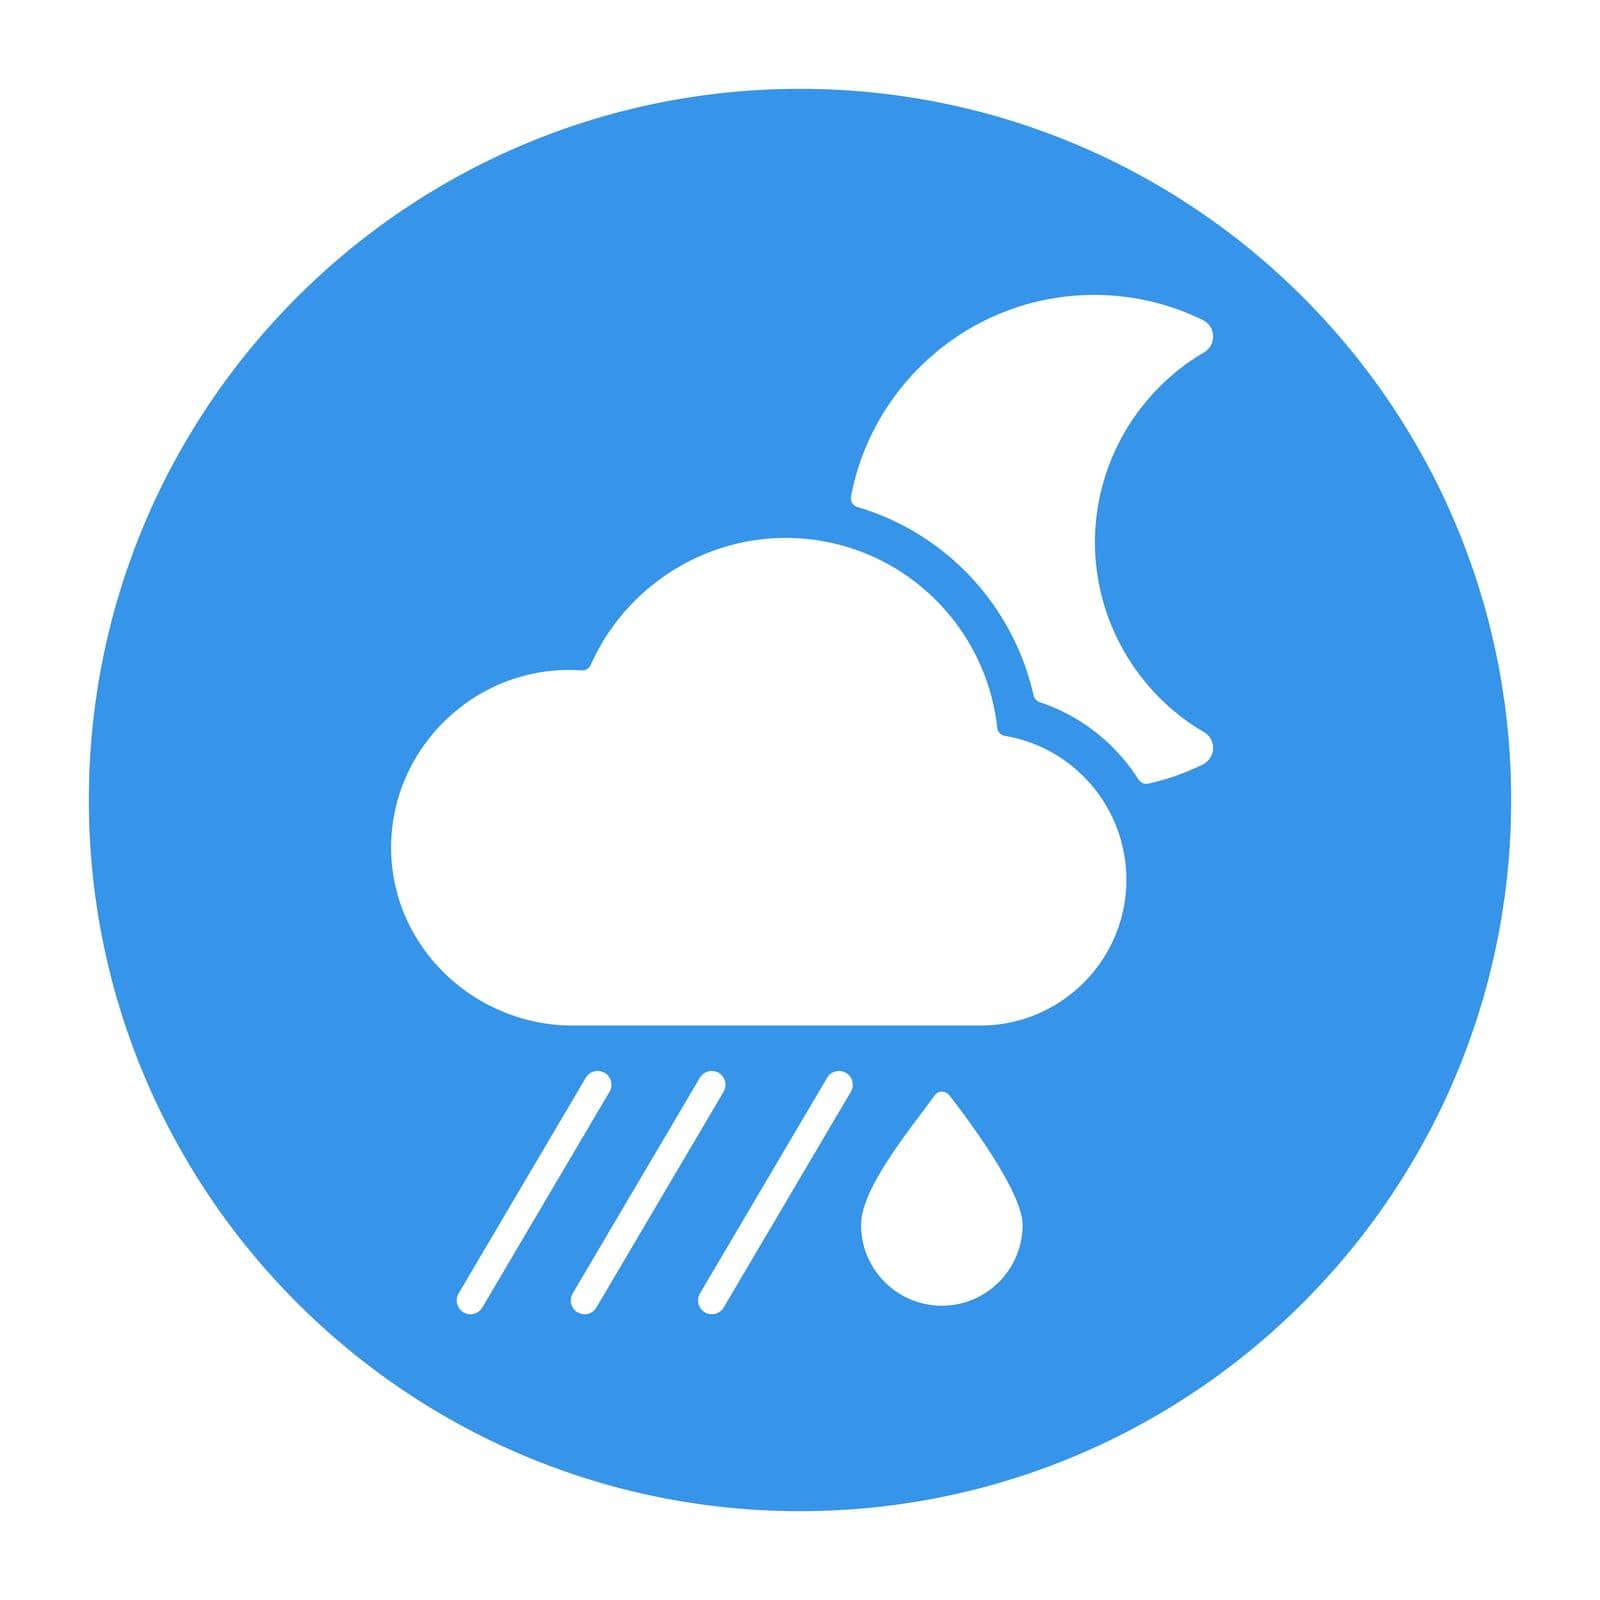 Raincloud with raindrop moon glyph icon. Meteorology sign. Graph symbol for travel, tourism and weather web site and apps design, logo, app, UI